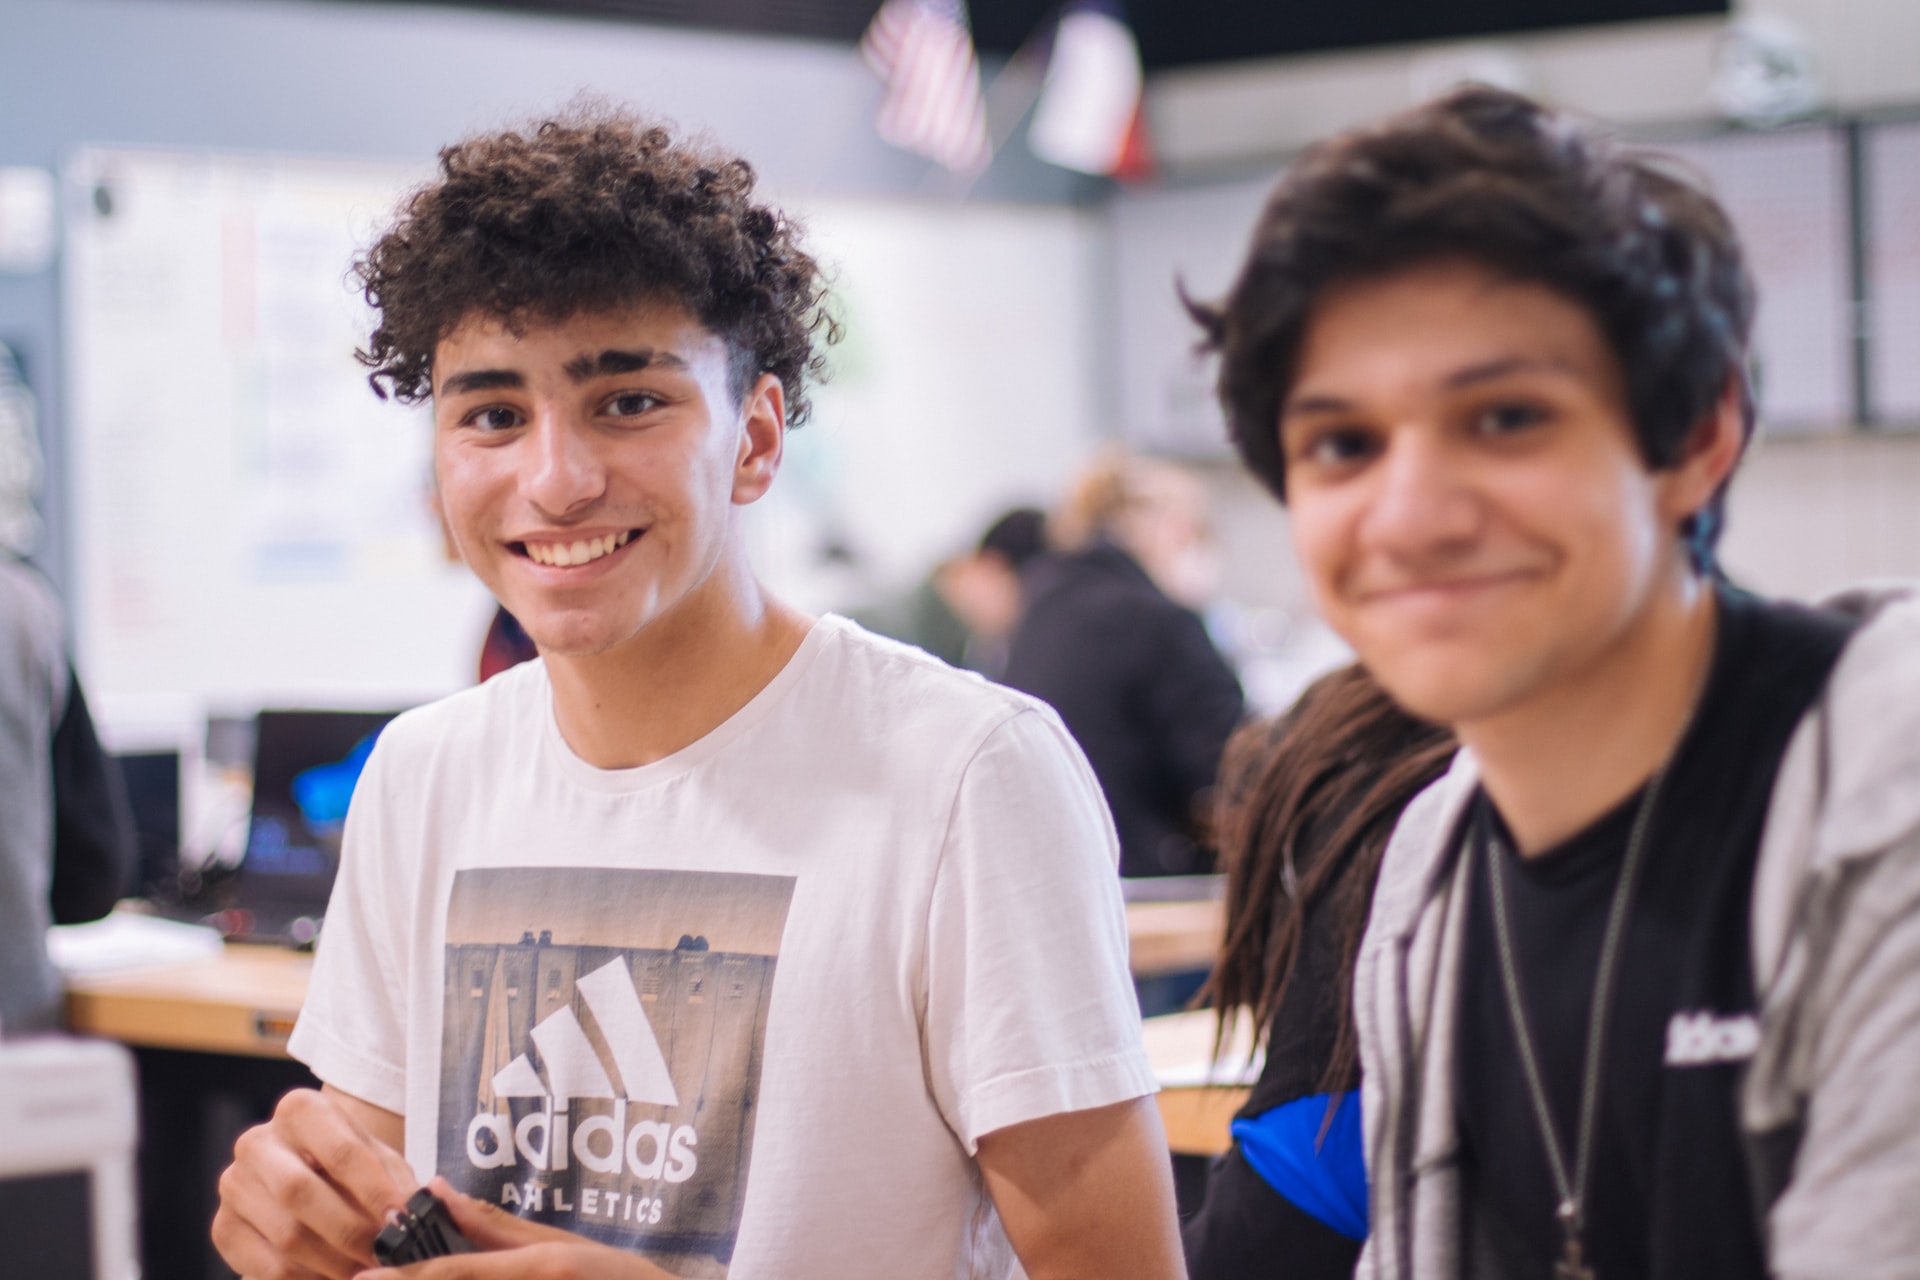 Two students smiling